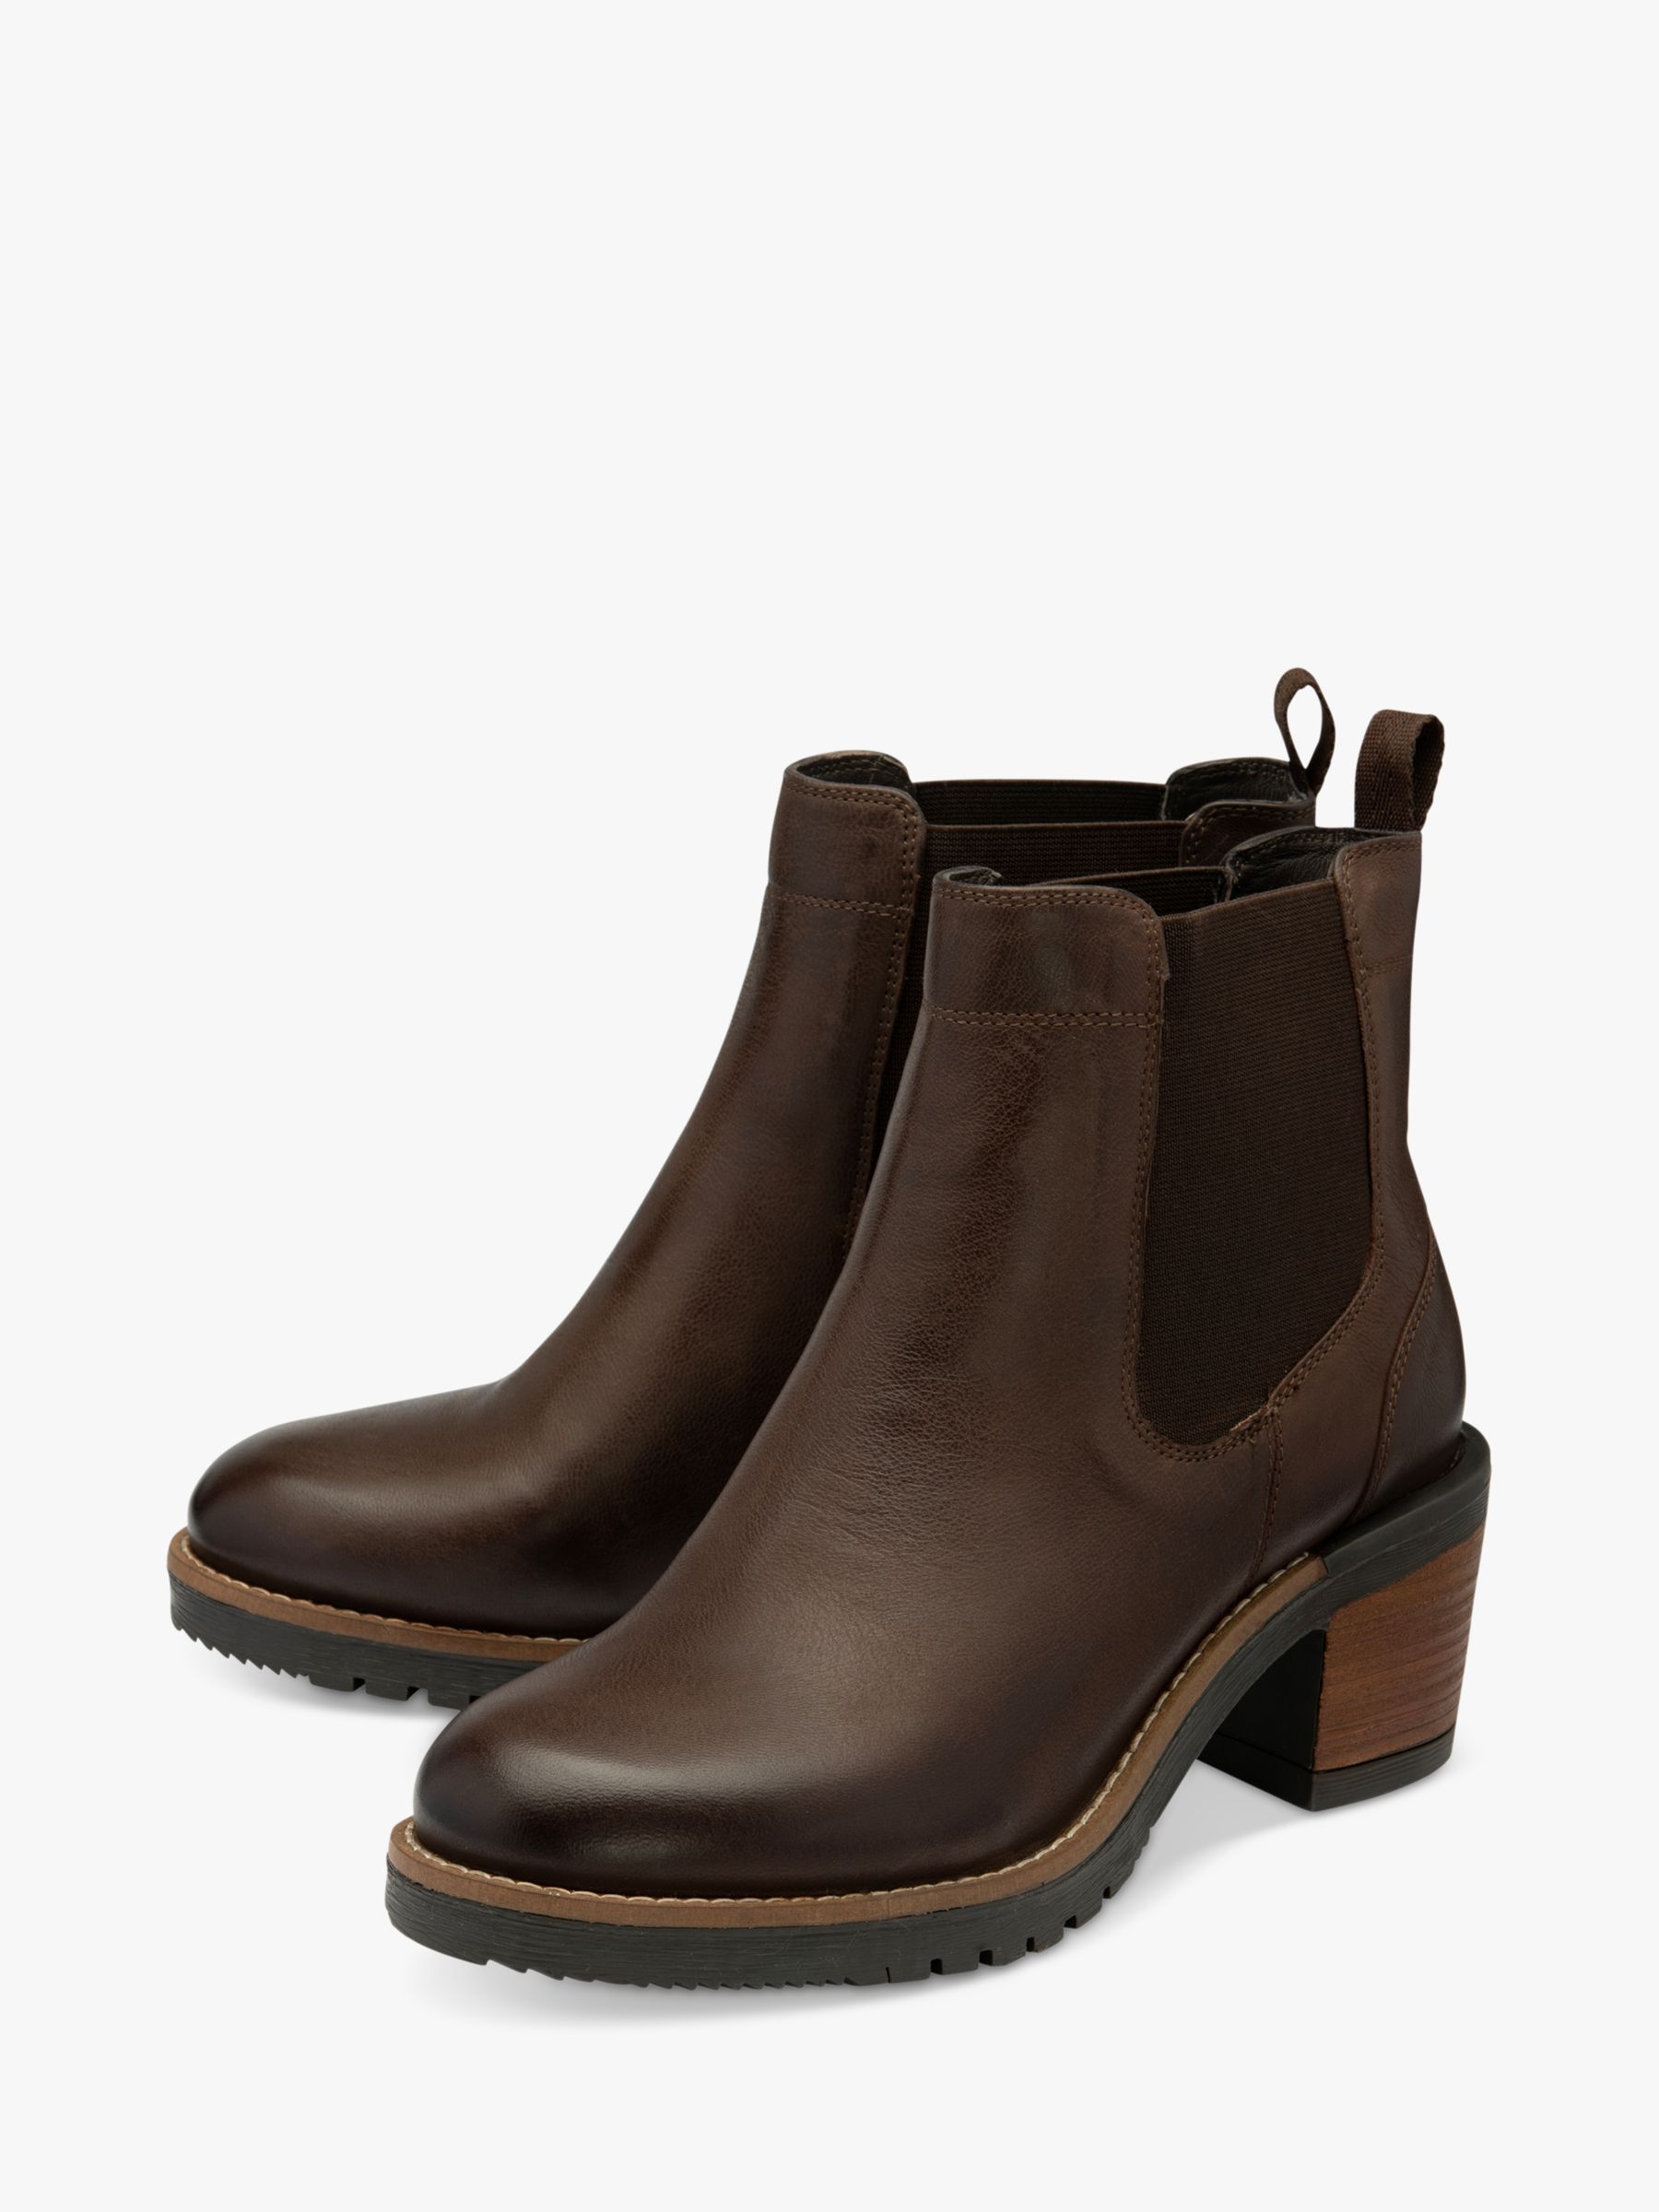 Ravel Bray Leather Block Heel Ankle Boots, Brown at John Lewis & Partners